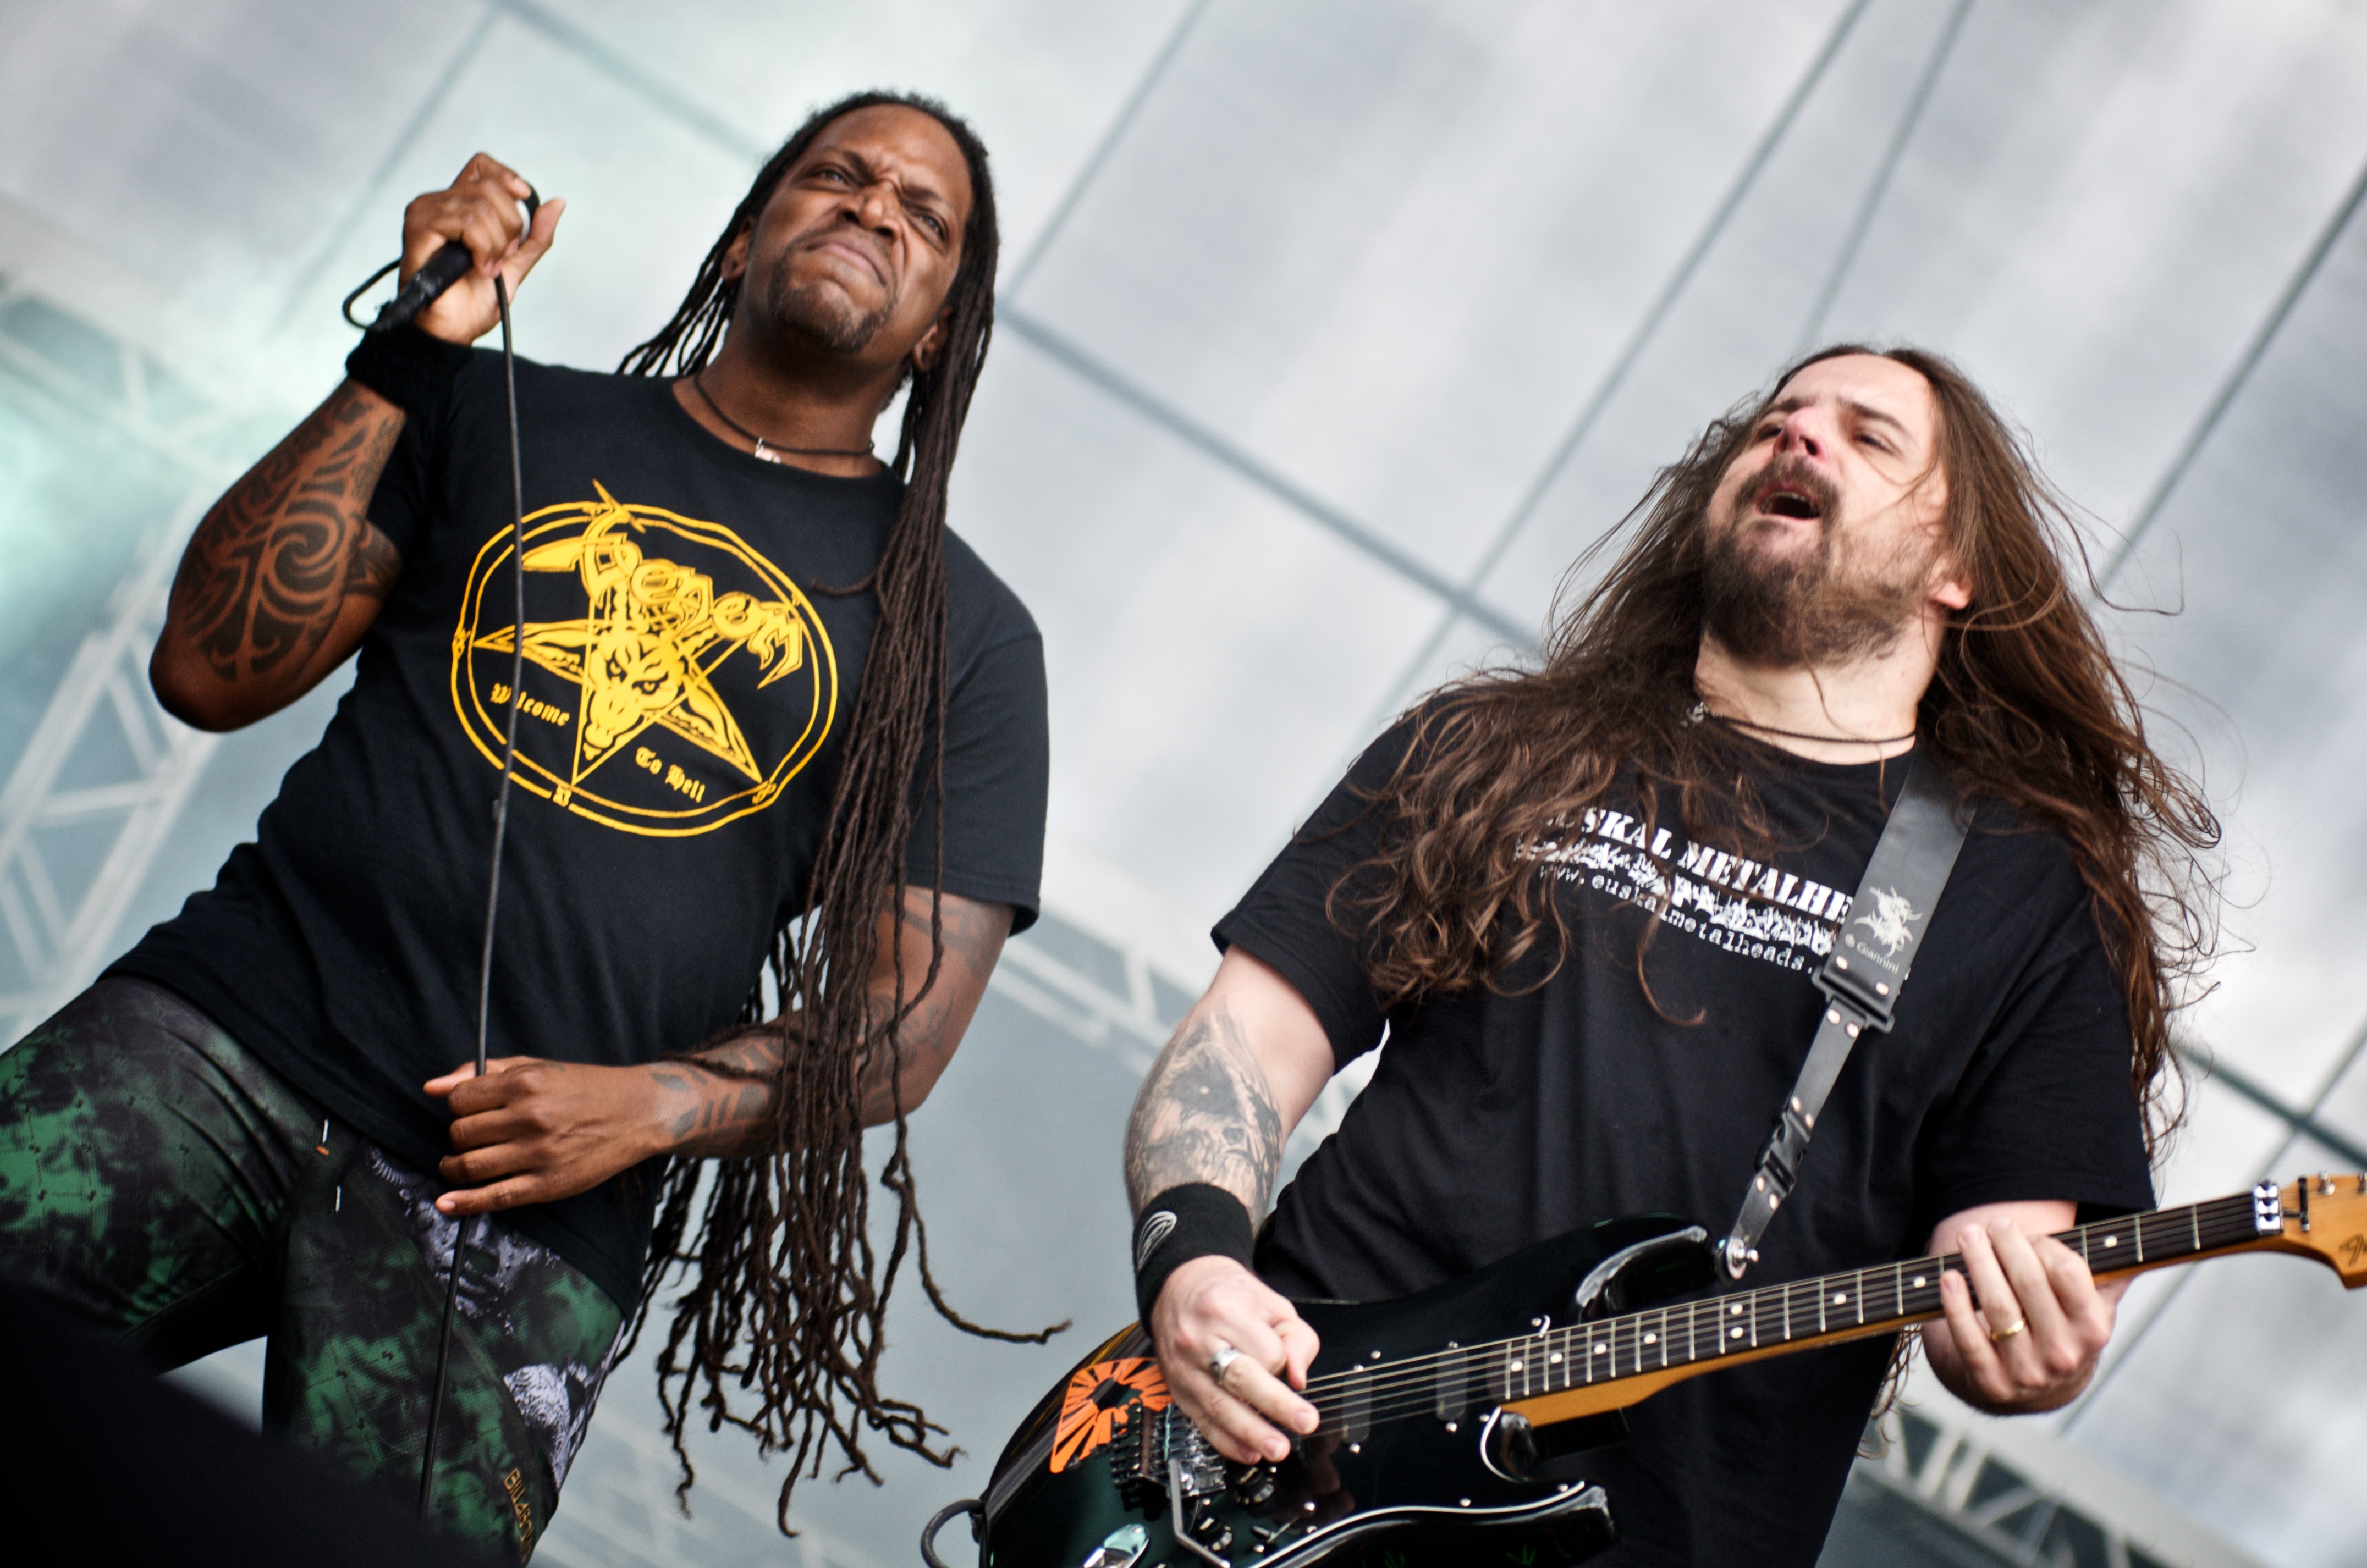 Amazing Sepultura Pictures & Backgrounds